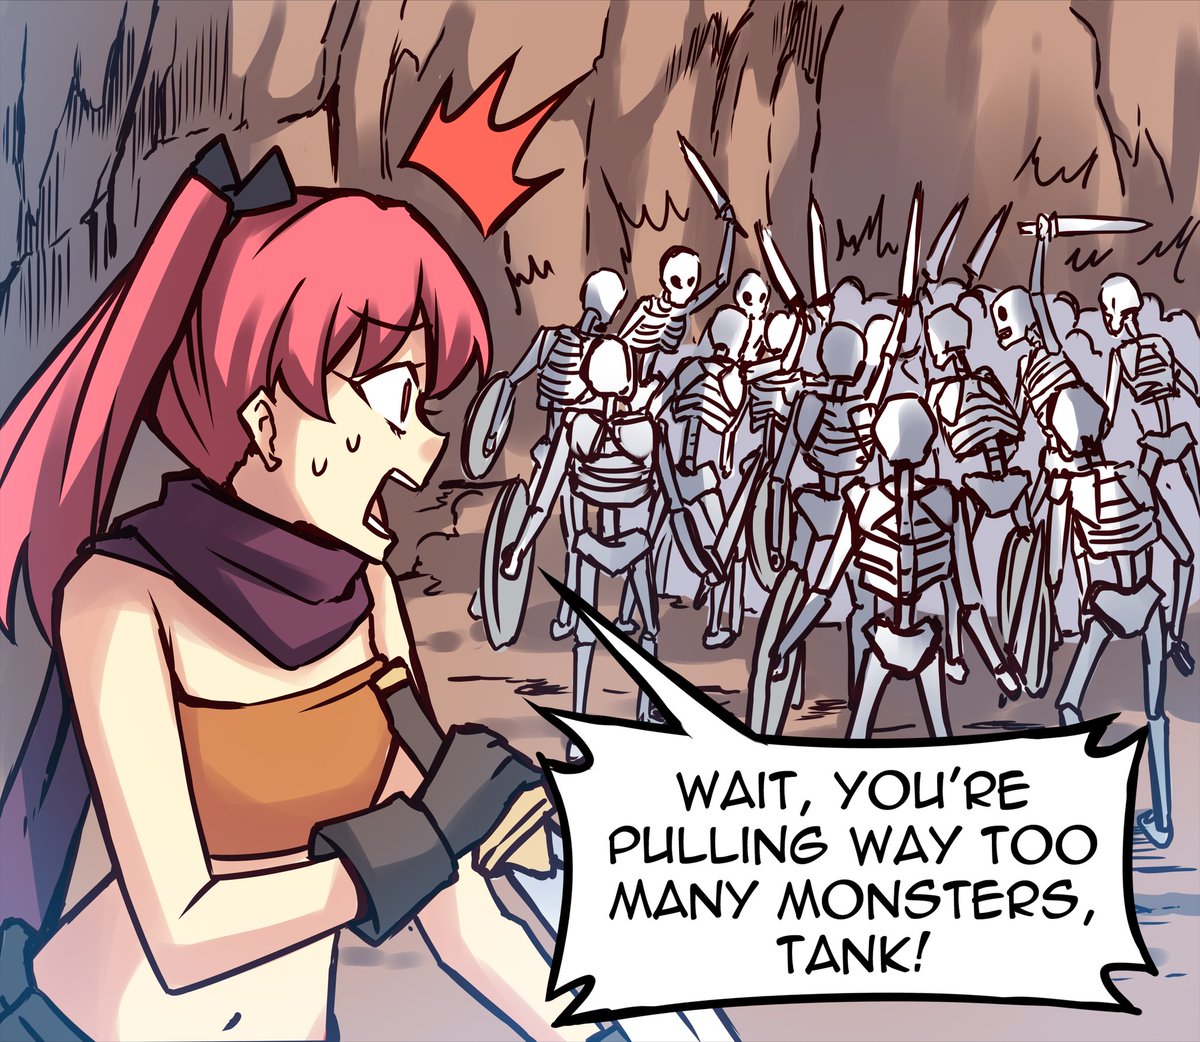 I wrote a comic about MMORPG tanks! 